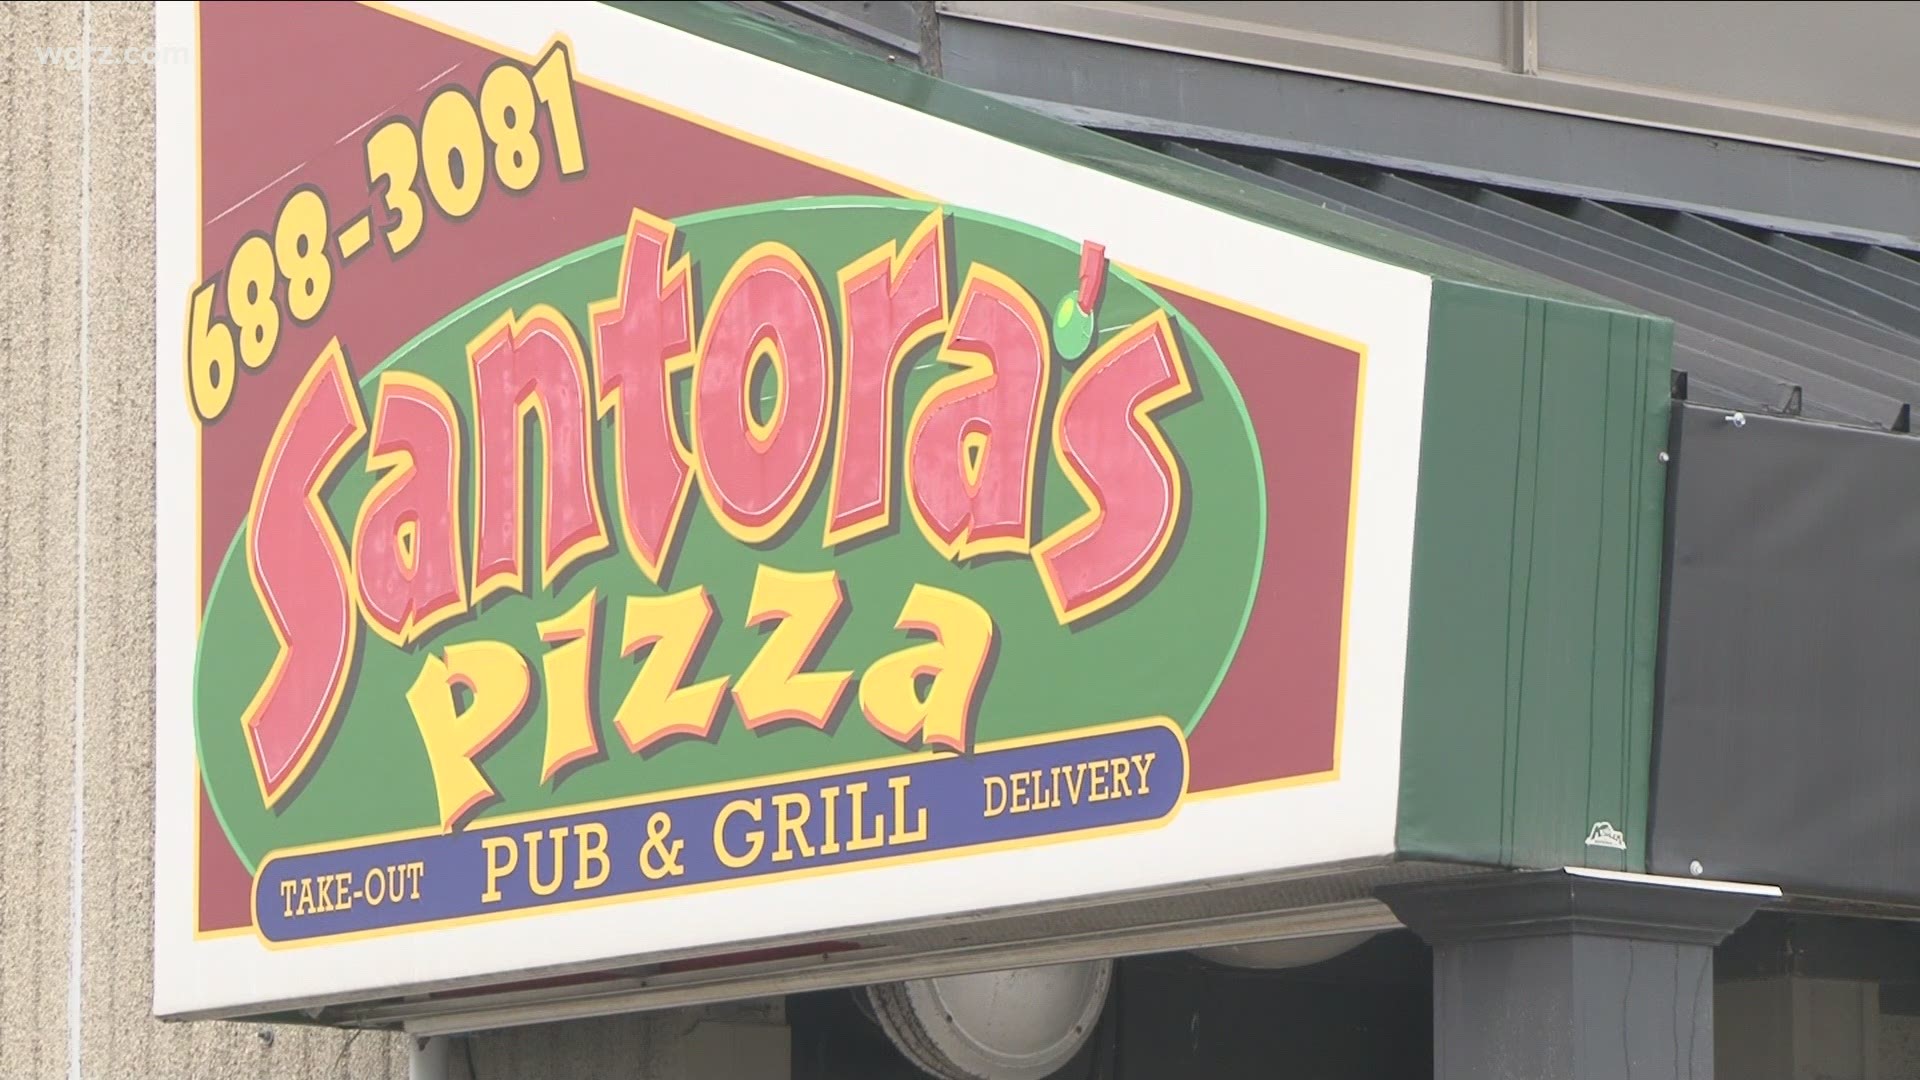 It's been less than a week since several local restaurants banned together to file a lawsuit against the state, and now one of them has themselves fighting for more.